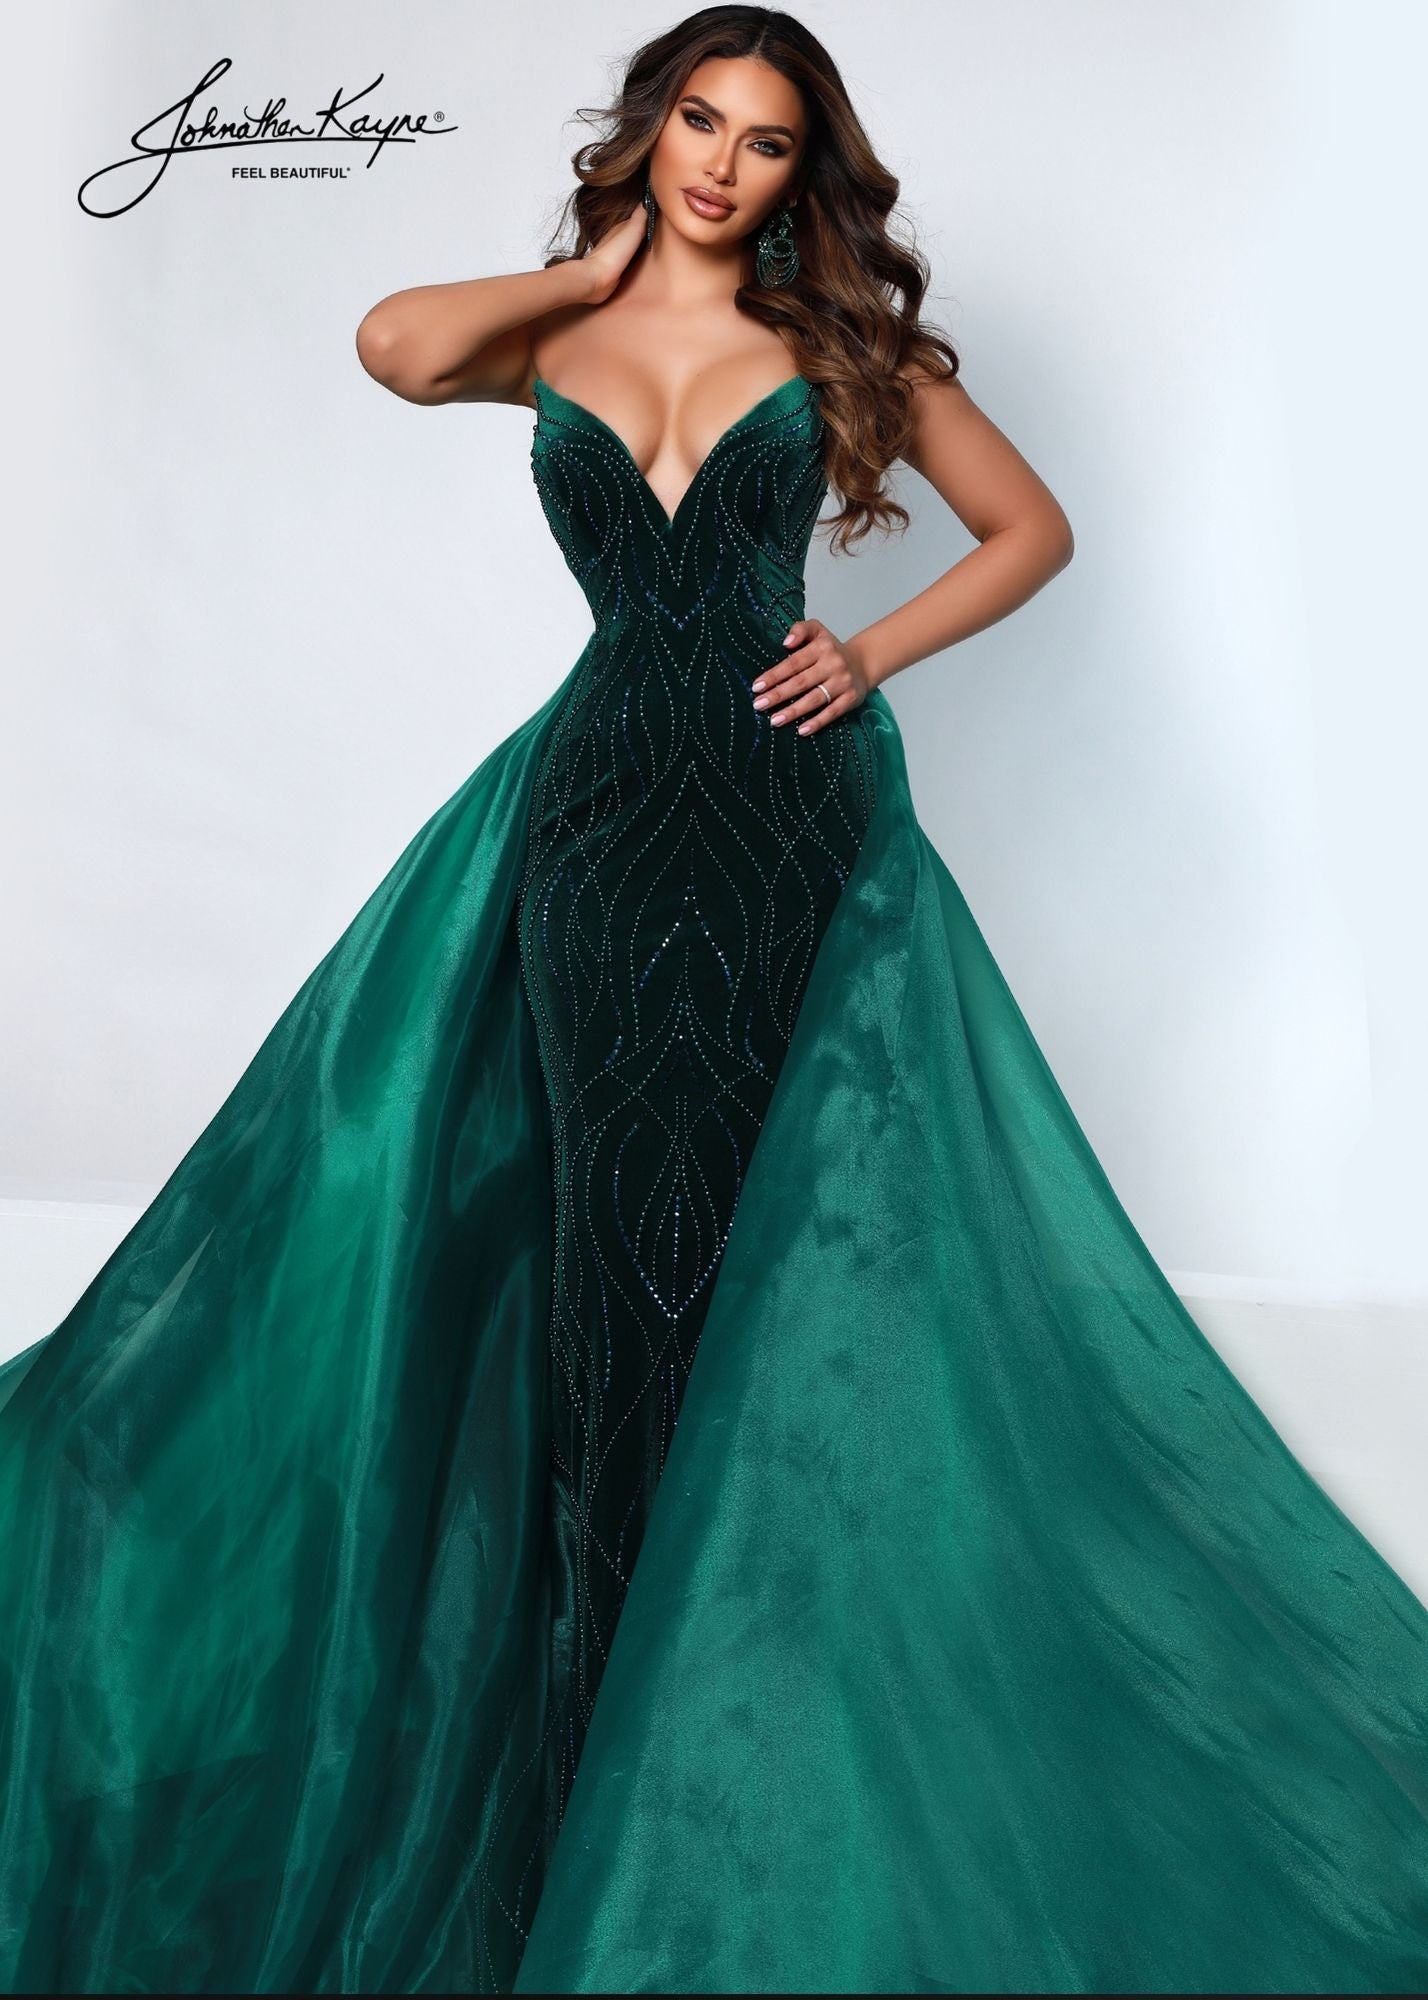 Johnathan-Kayne-2555-Emerald-Pageant-Gown-strapless-plunging-neckline-embellished-velvet-fitted-evening-dress-with-full-organza-overskirt